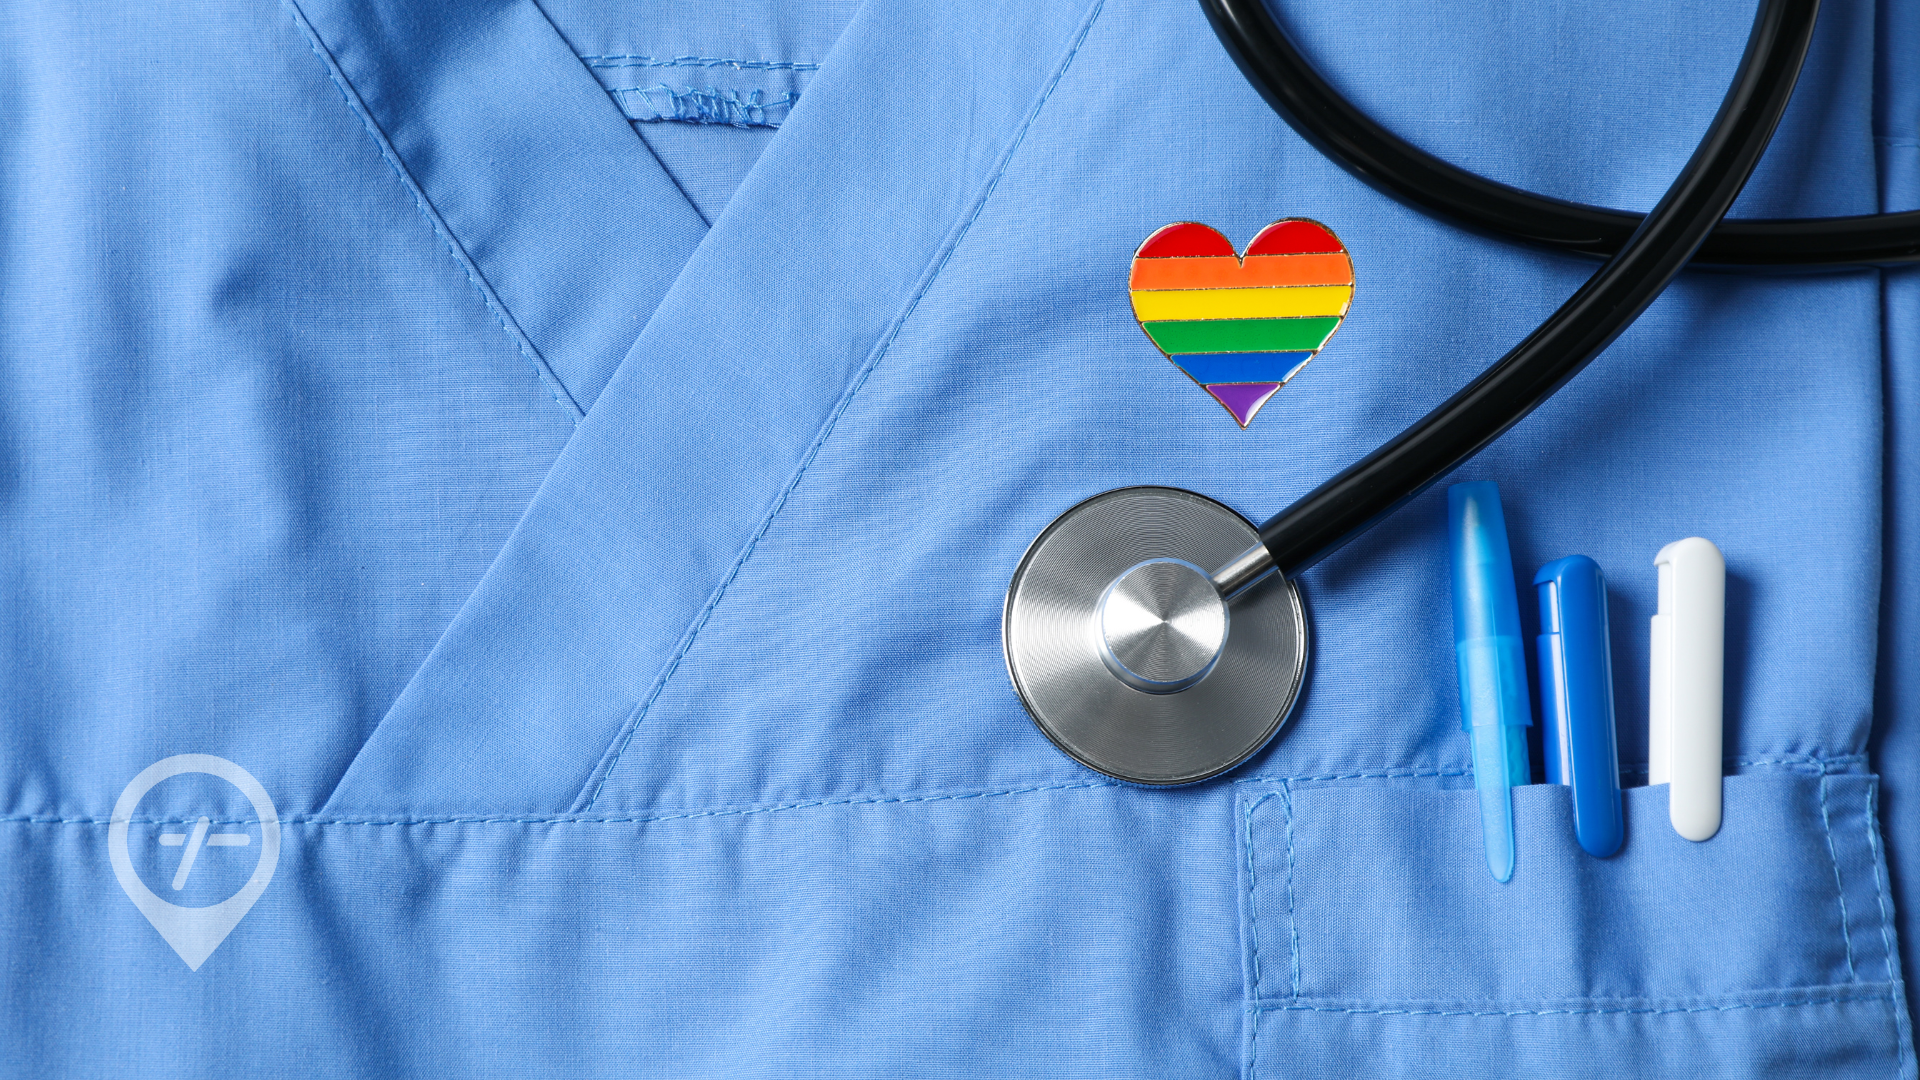 Nurses have been caring with pride for decades. Let's honor the exceptional healthcare professionals who have and continue to advocate for LGBTQ+ patients. (Nurse wearing rainbow heart pin on scrubs.)